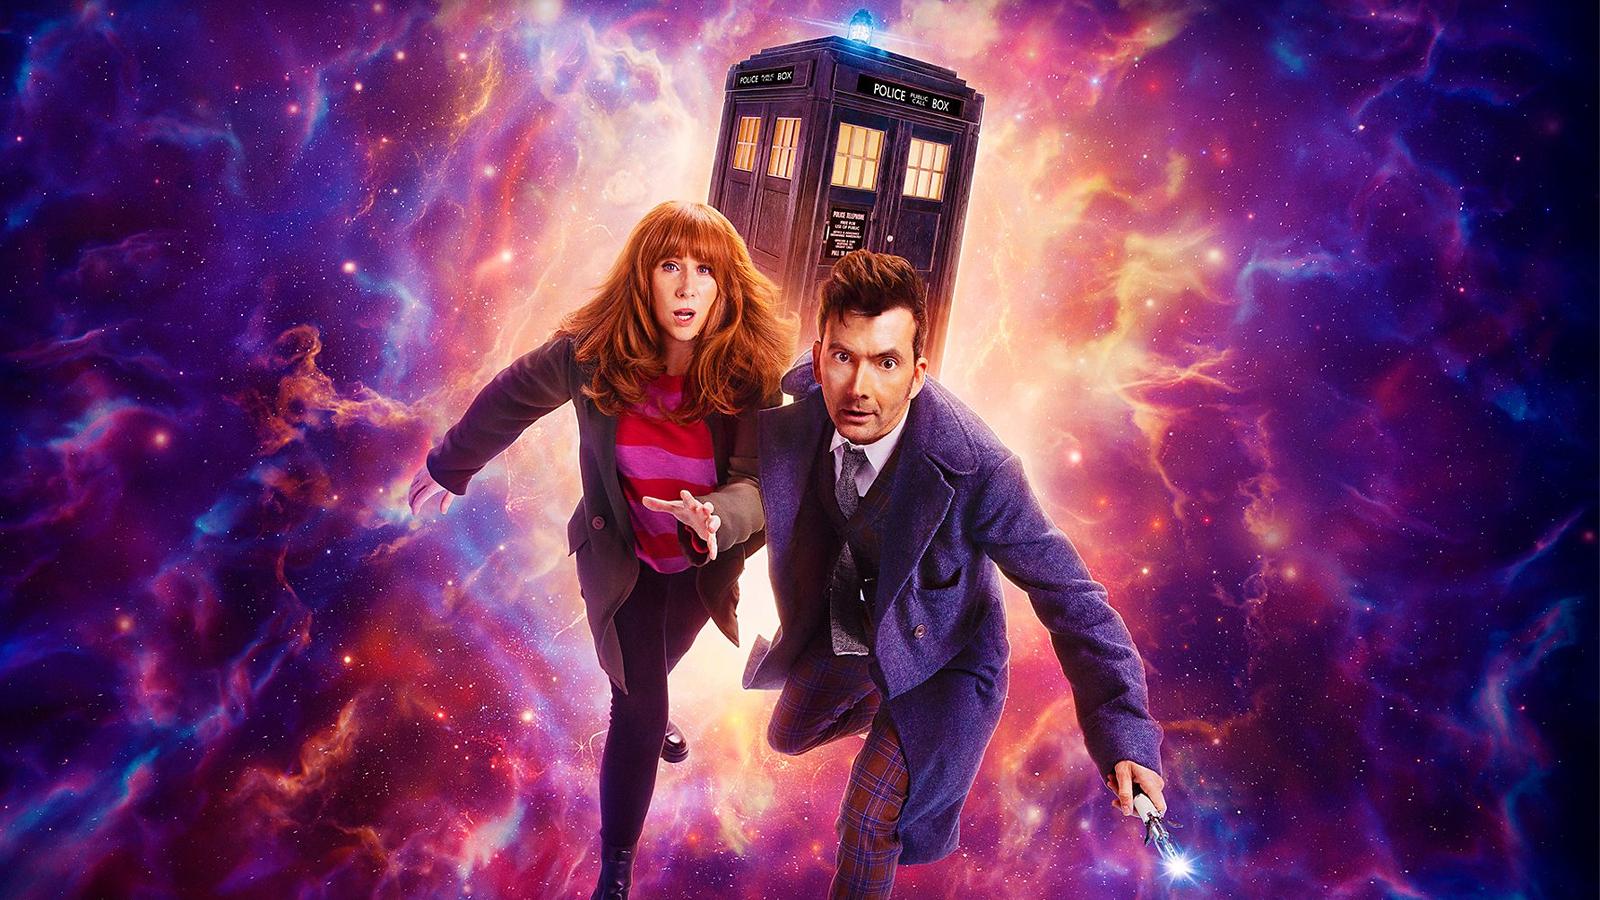 The Fourteenth Doctor and Donna Noble in a publicity still for the Doctor Who 60th anniversary specials.